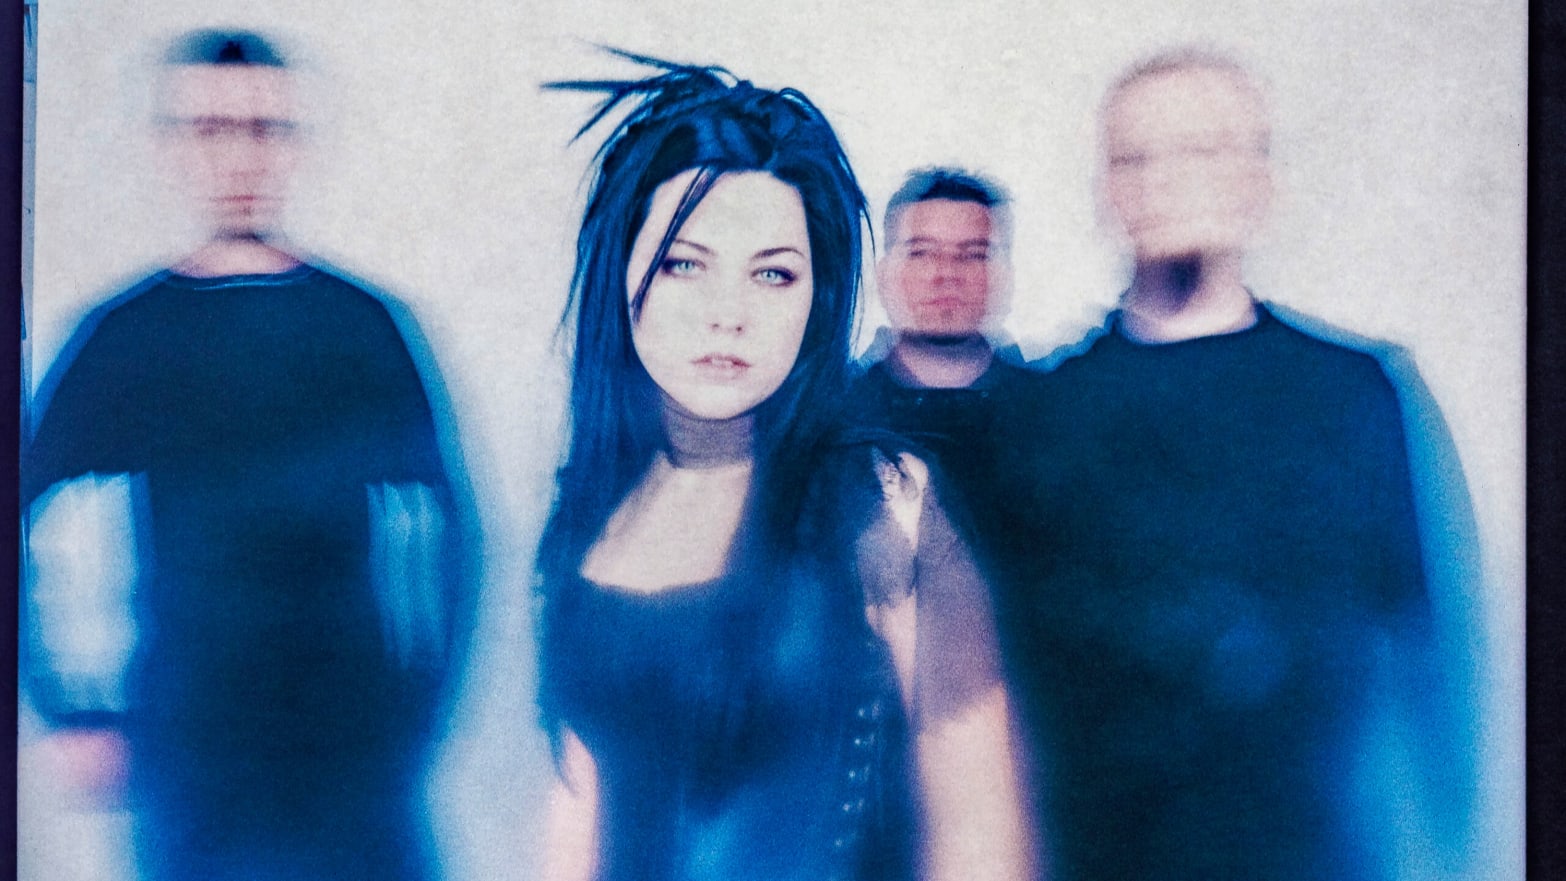 Hear Demo of Evanescence's 'Bring Me to Life' Without Rap Part